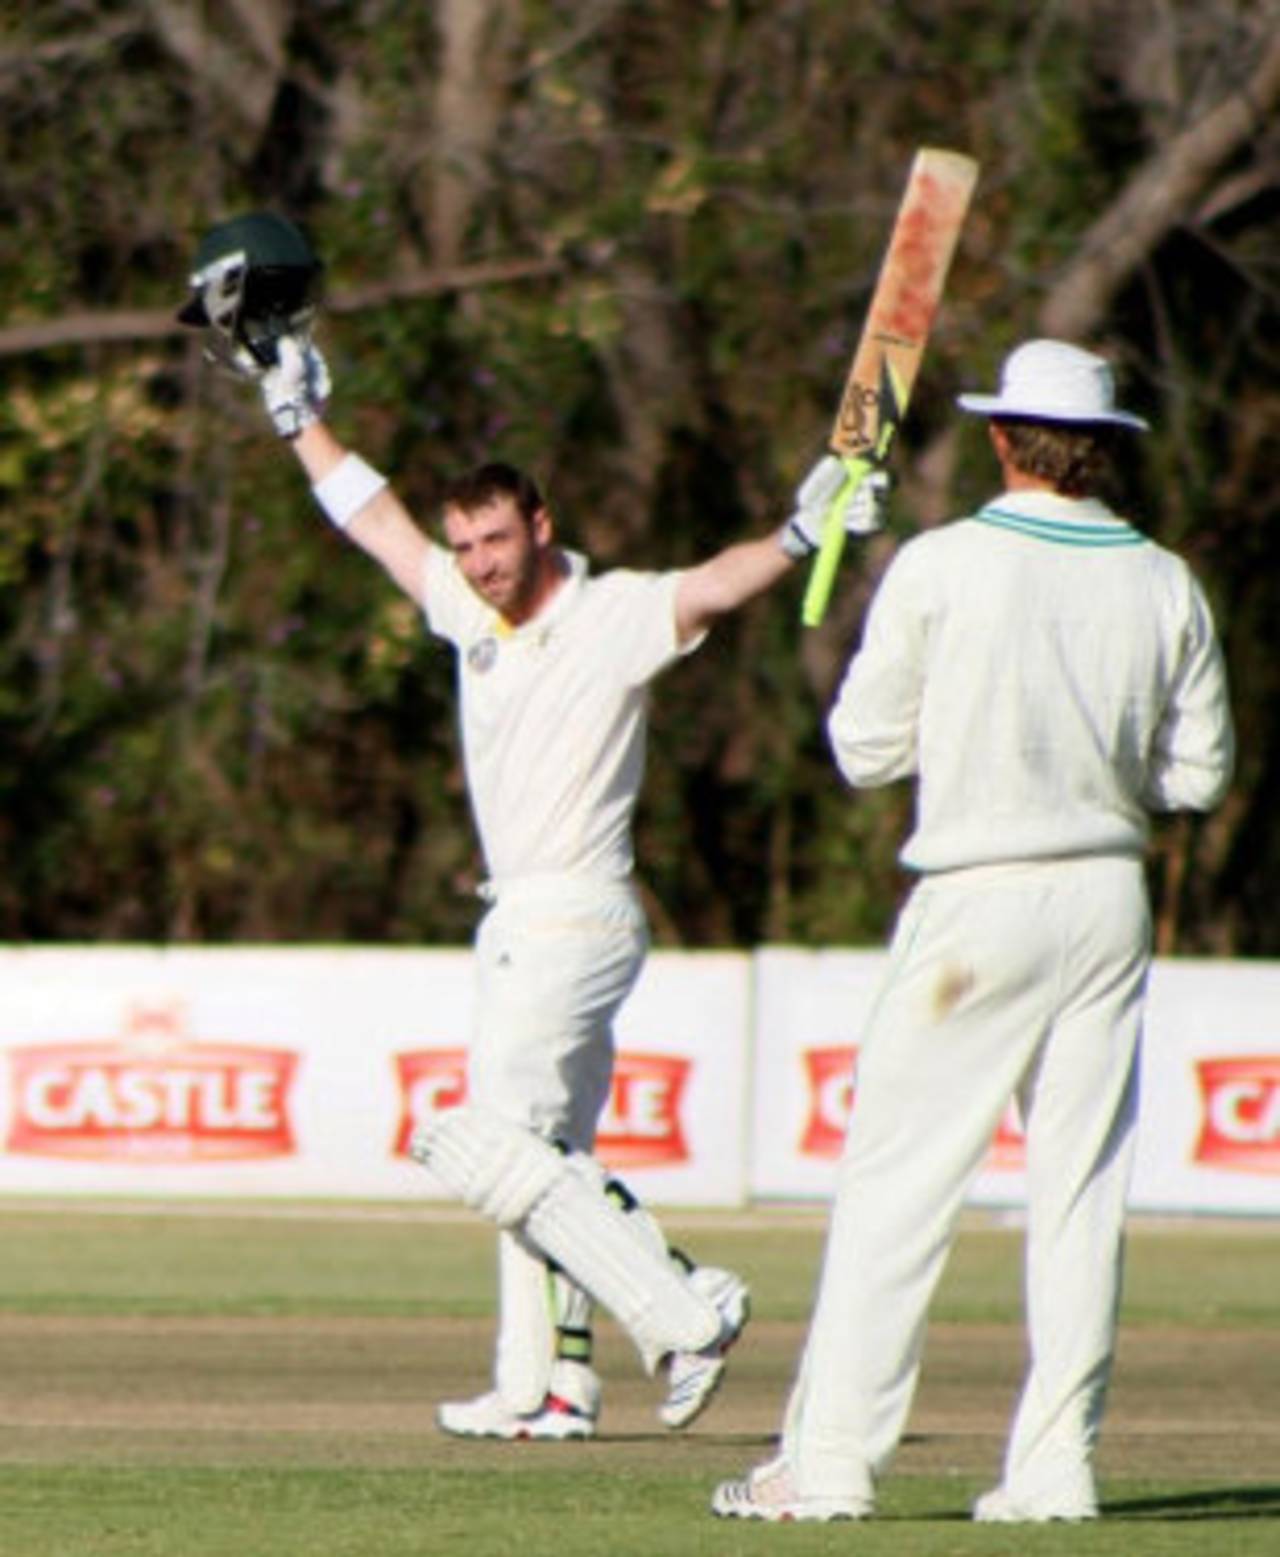 Phillip Hughes acknowledges the spectators' applause after reaching a ton, Zimbabwe XI v Australia, Harare, 2nd day, July 16 2011